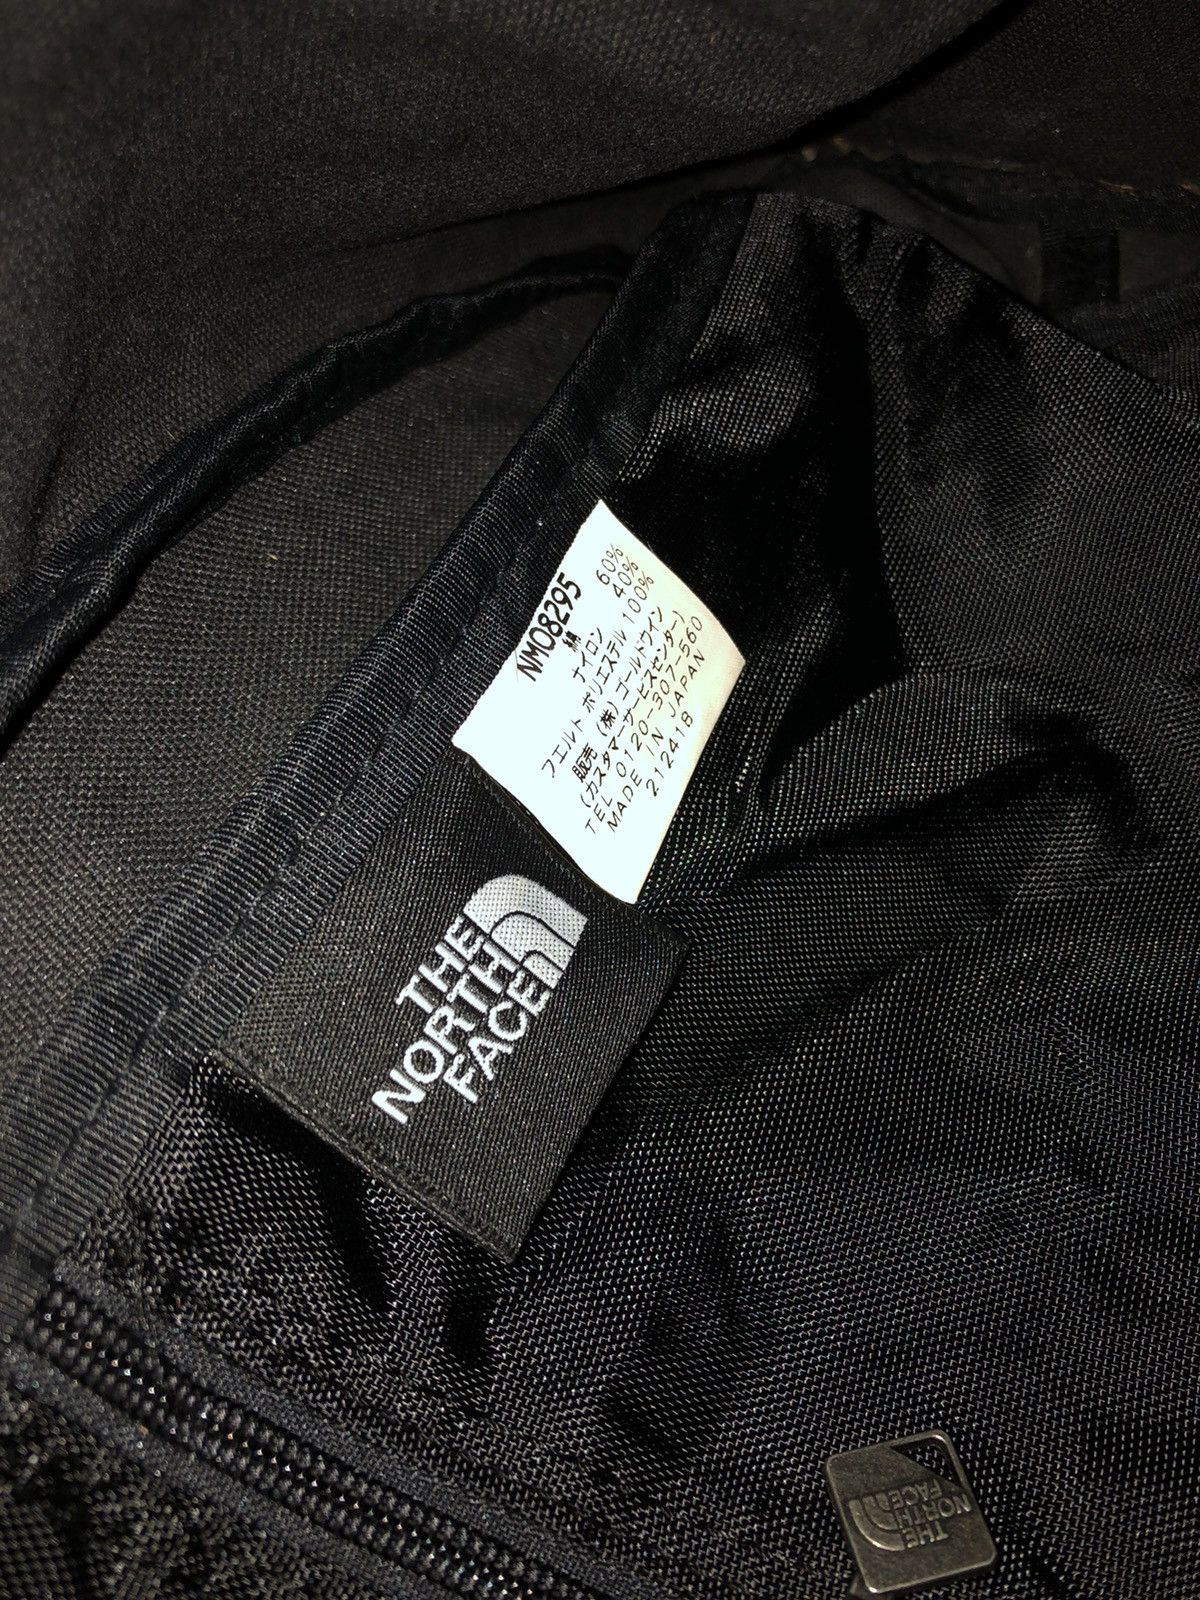 TNF The North Face Canvas Material Sling Bag - 7